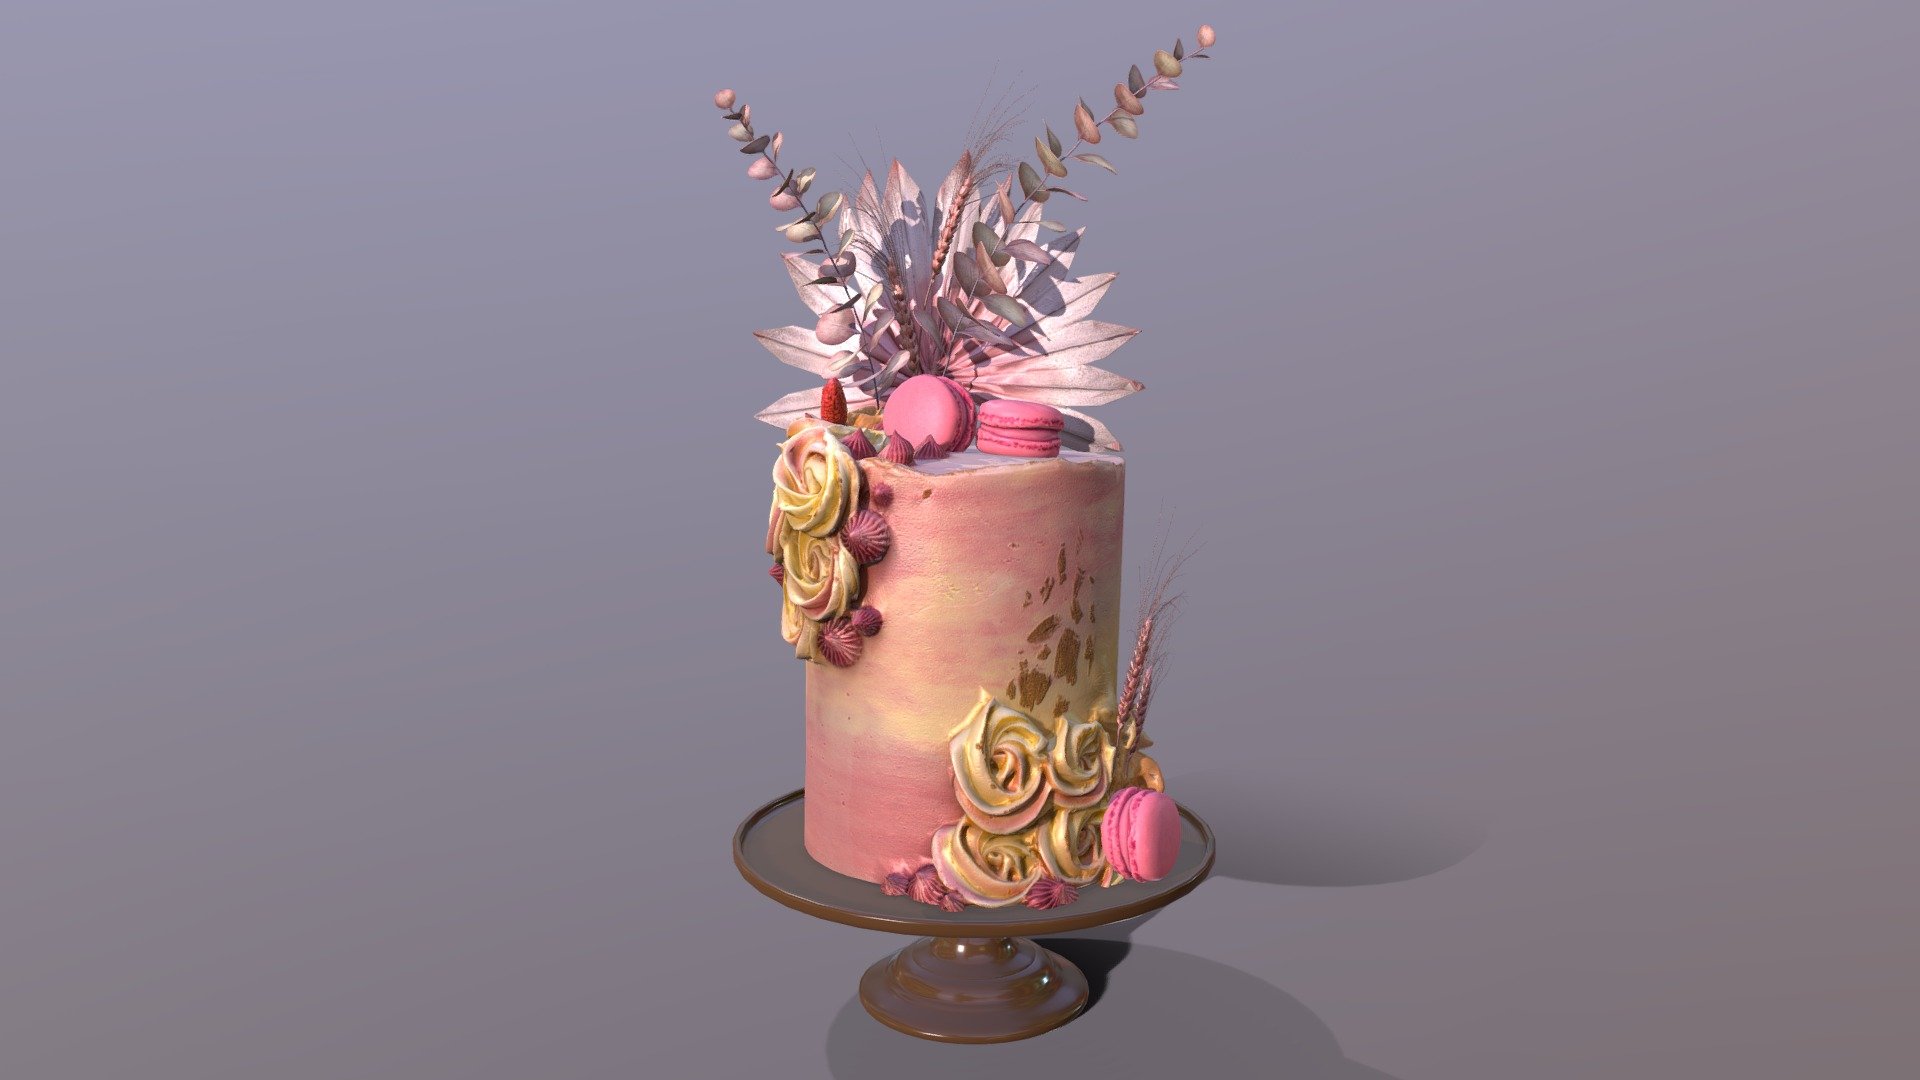 3D scan of a Luxury Golden Pink Buttercream Cake on the elegant mosser stand which is made by CAKESBURG Online Premium Cake Shop in UK. 

This 3D cake can be personalised with any text and colour you want. Please contact us.

You can also order real cake from this link: https://cakesburg.co.uk/products/luxury-buttercream-cake-06?_pos=1&amp;_sid=685b5456e&amp;_ss=r

Cake Textures - 4096*4096px PBR photoscan-based materials (Base Color, Normal, Roughness, Specular, AO)

Macarone textures - 4096*4096px PBR photoscan-based materials (Base Color, Normal, Roughness, Specular, AO)

Palm, Eucalyptus and Wheat Textures - 4096*4096px PBR photoscan-based materials (Base Color, Normal, Roughness, Specular, AO) - Luxury Golden Swirl Cake - Buy Royalty Free 3D model by Cakesburg Premium 3D Cake Shop (@Viscom_Cakesburg) 3d model